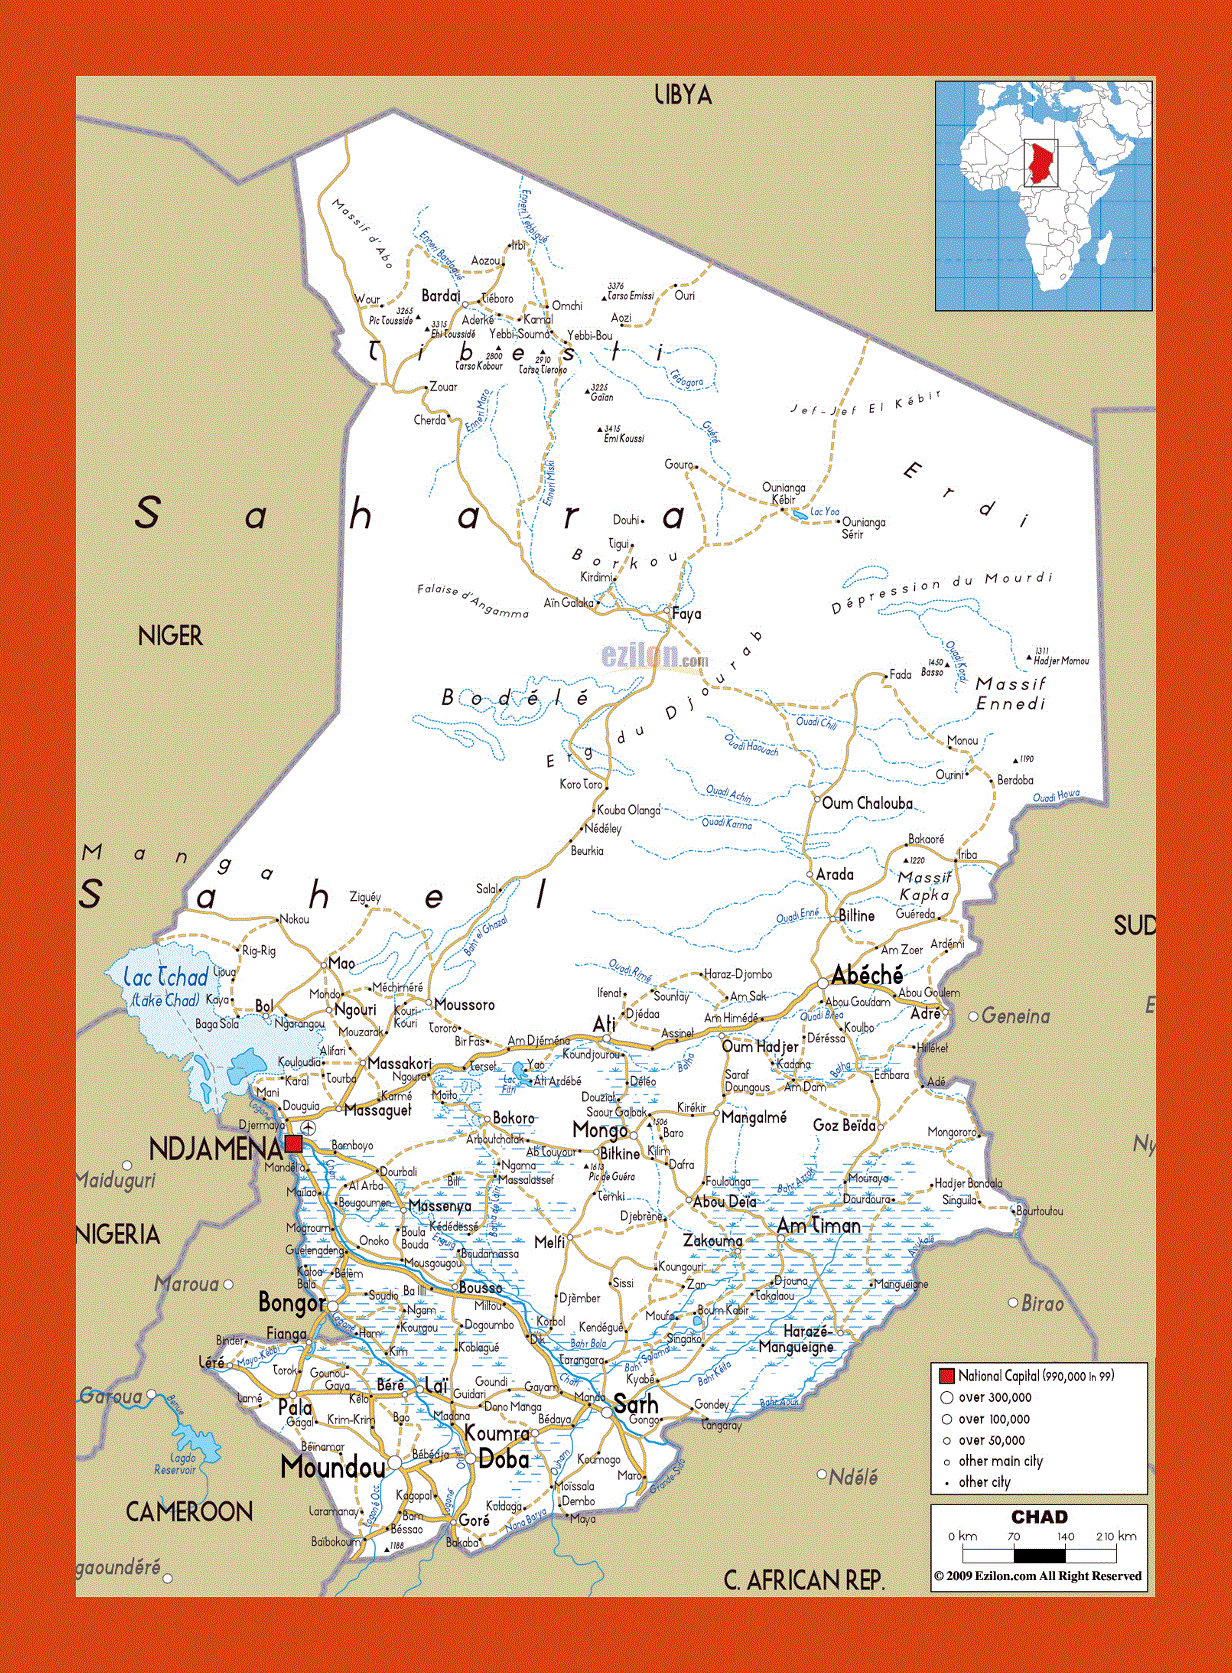 Road map of Chad